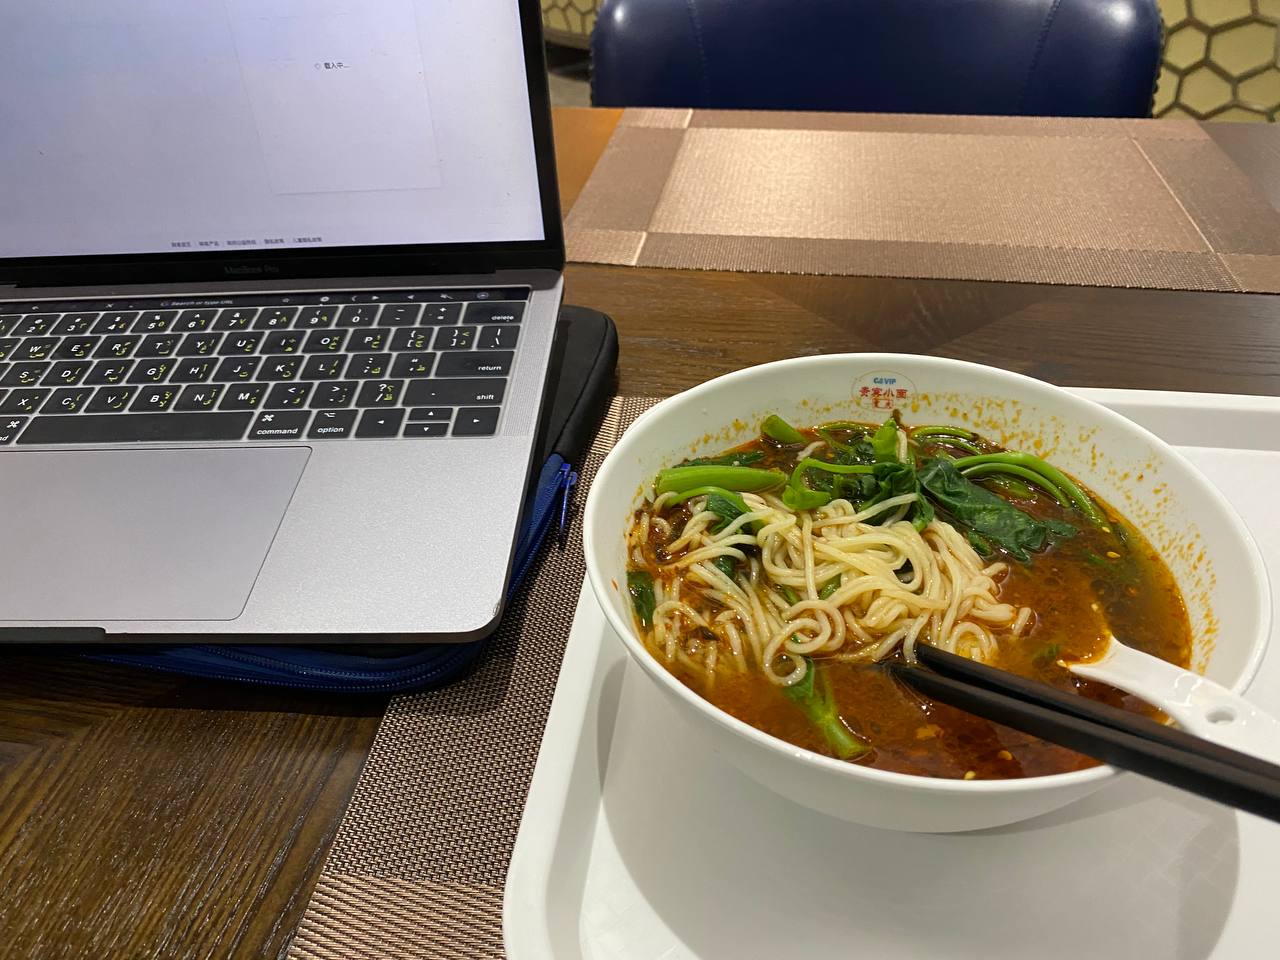 Alt text: A bowl of chow mein and a computer on the table of the lounge.